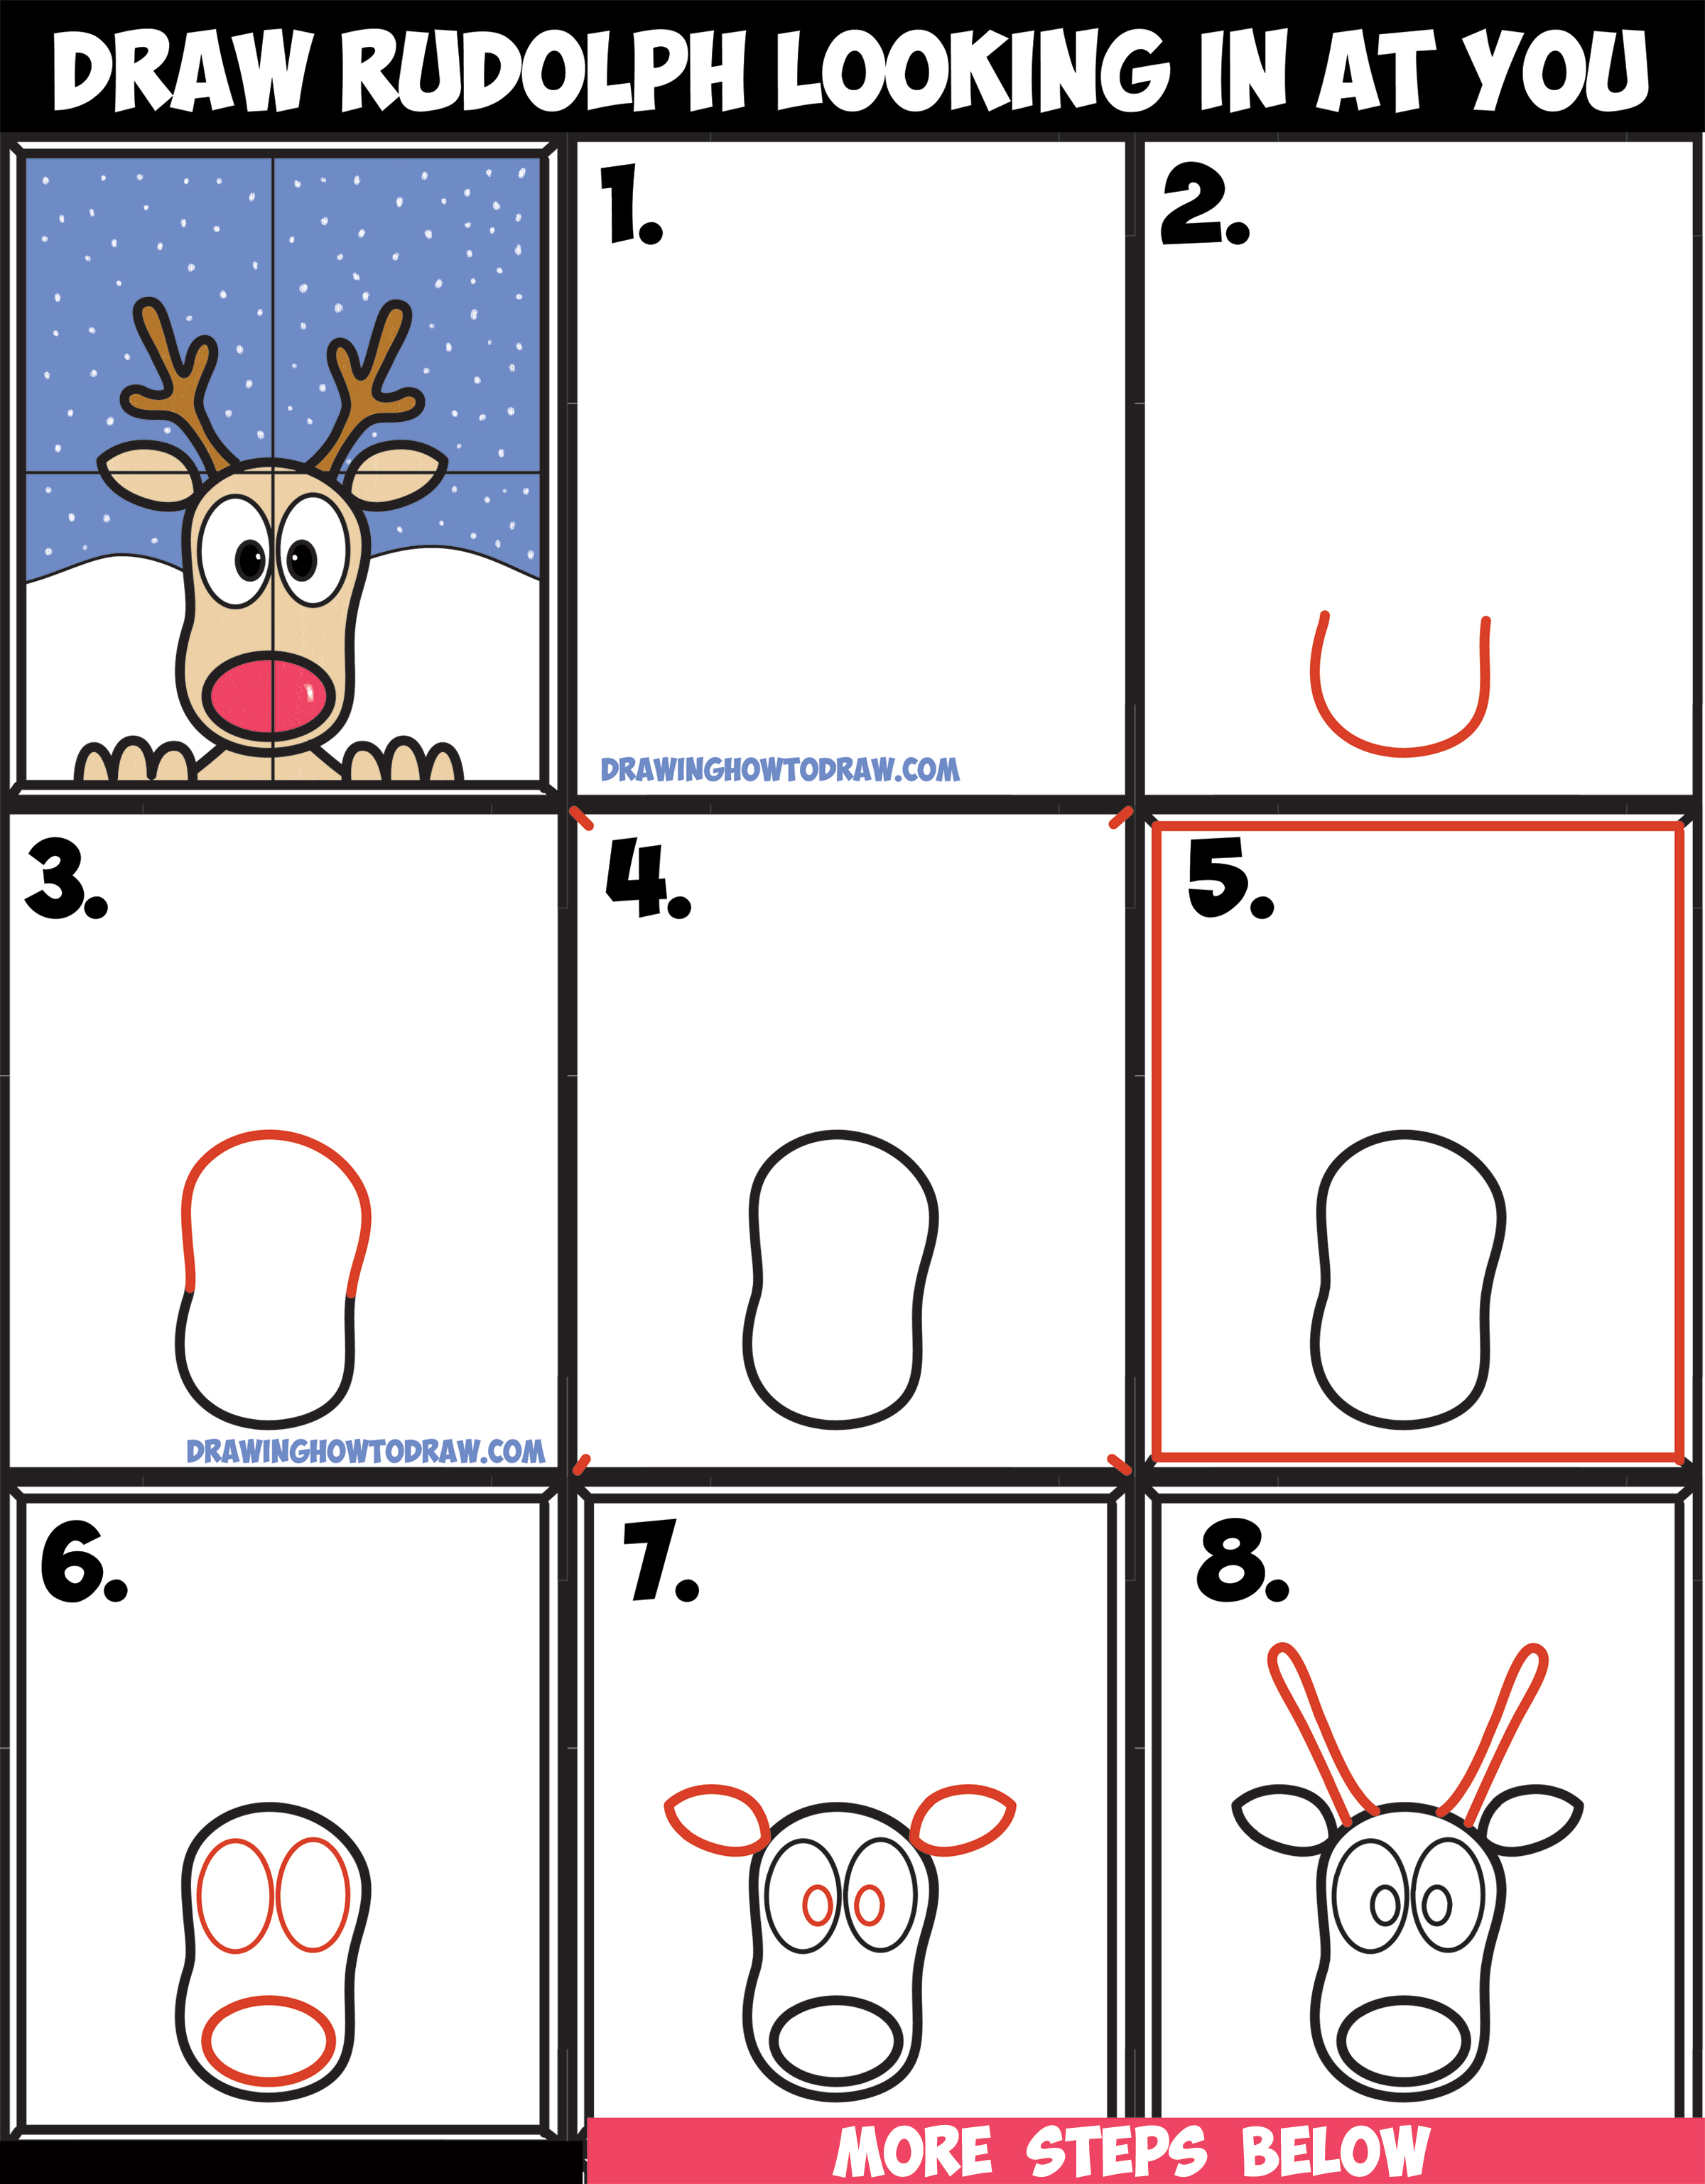 How to Draw Rudolph the Red Nosed Reindeer Looking in Window Easy Step by Step Drawing Tutorial Art Lesson for Kids on Christmas